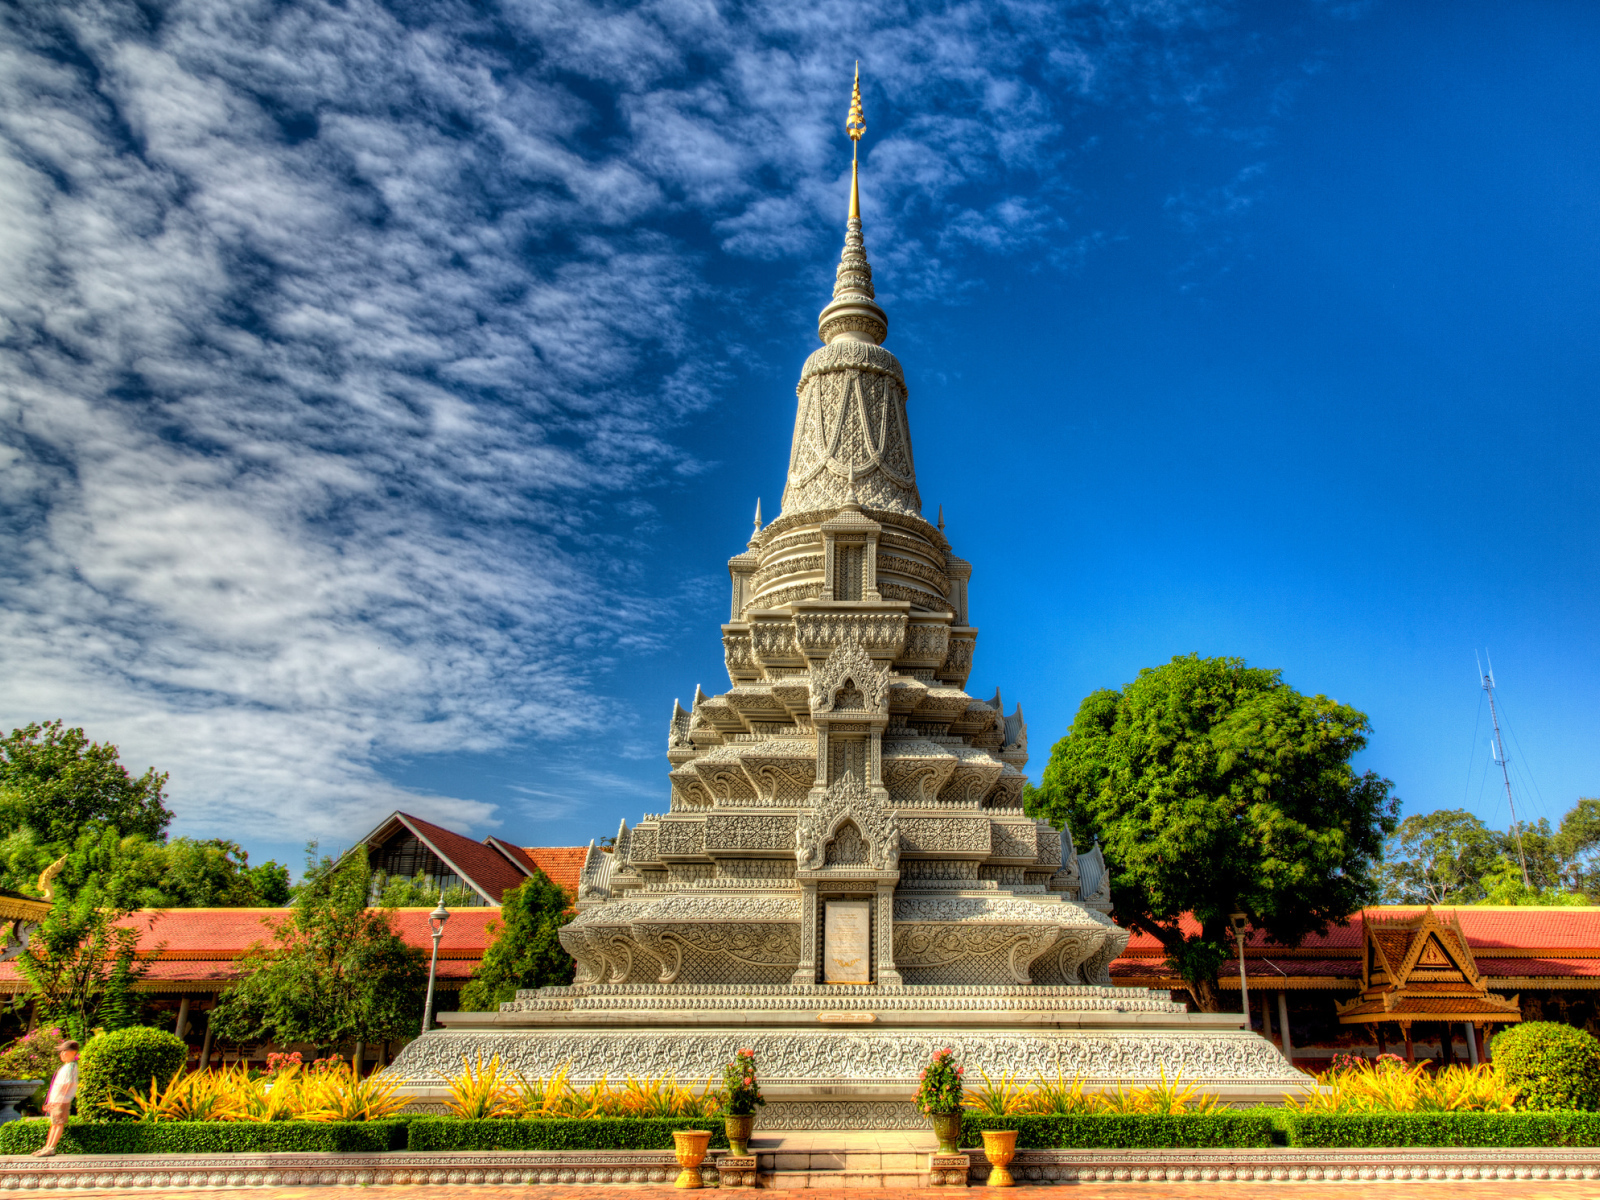 Temple of the Silver Pagoda on the background of blue sky, Cambodia